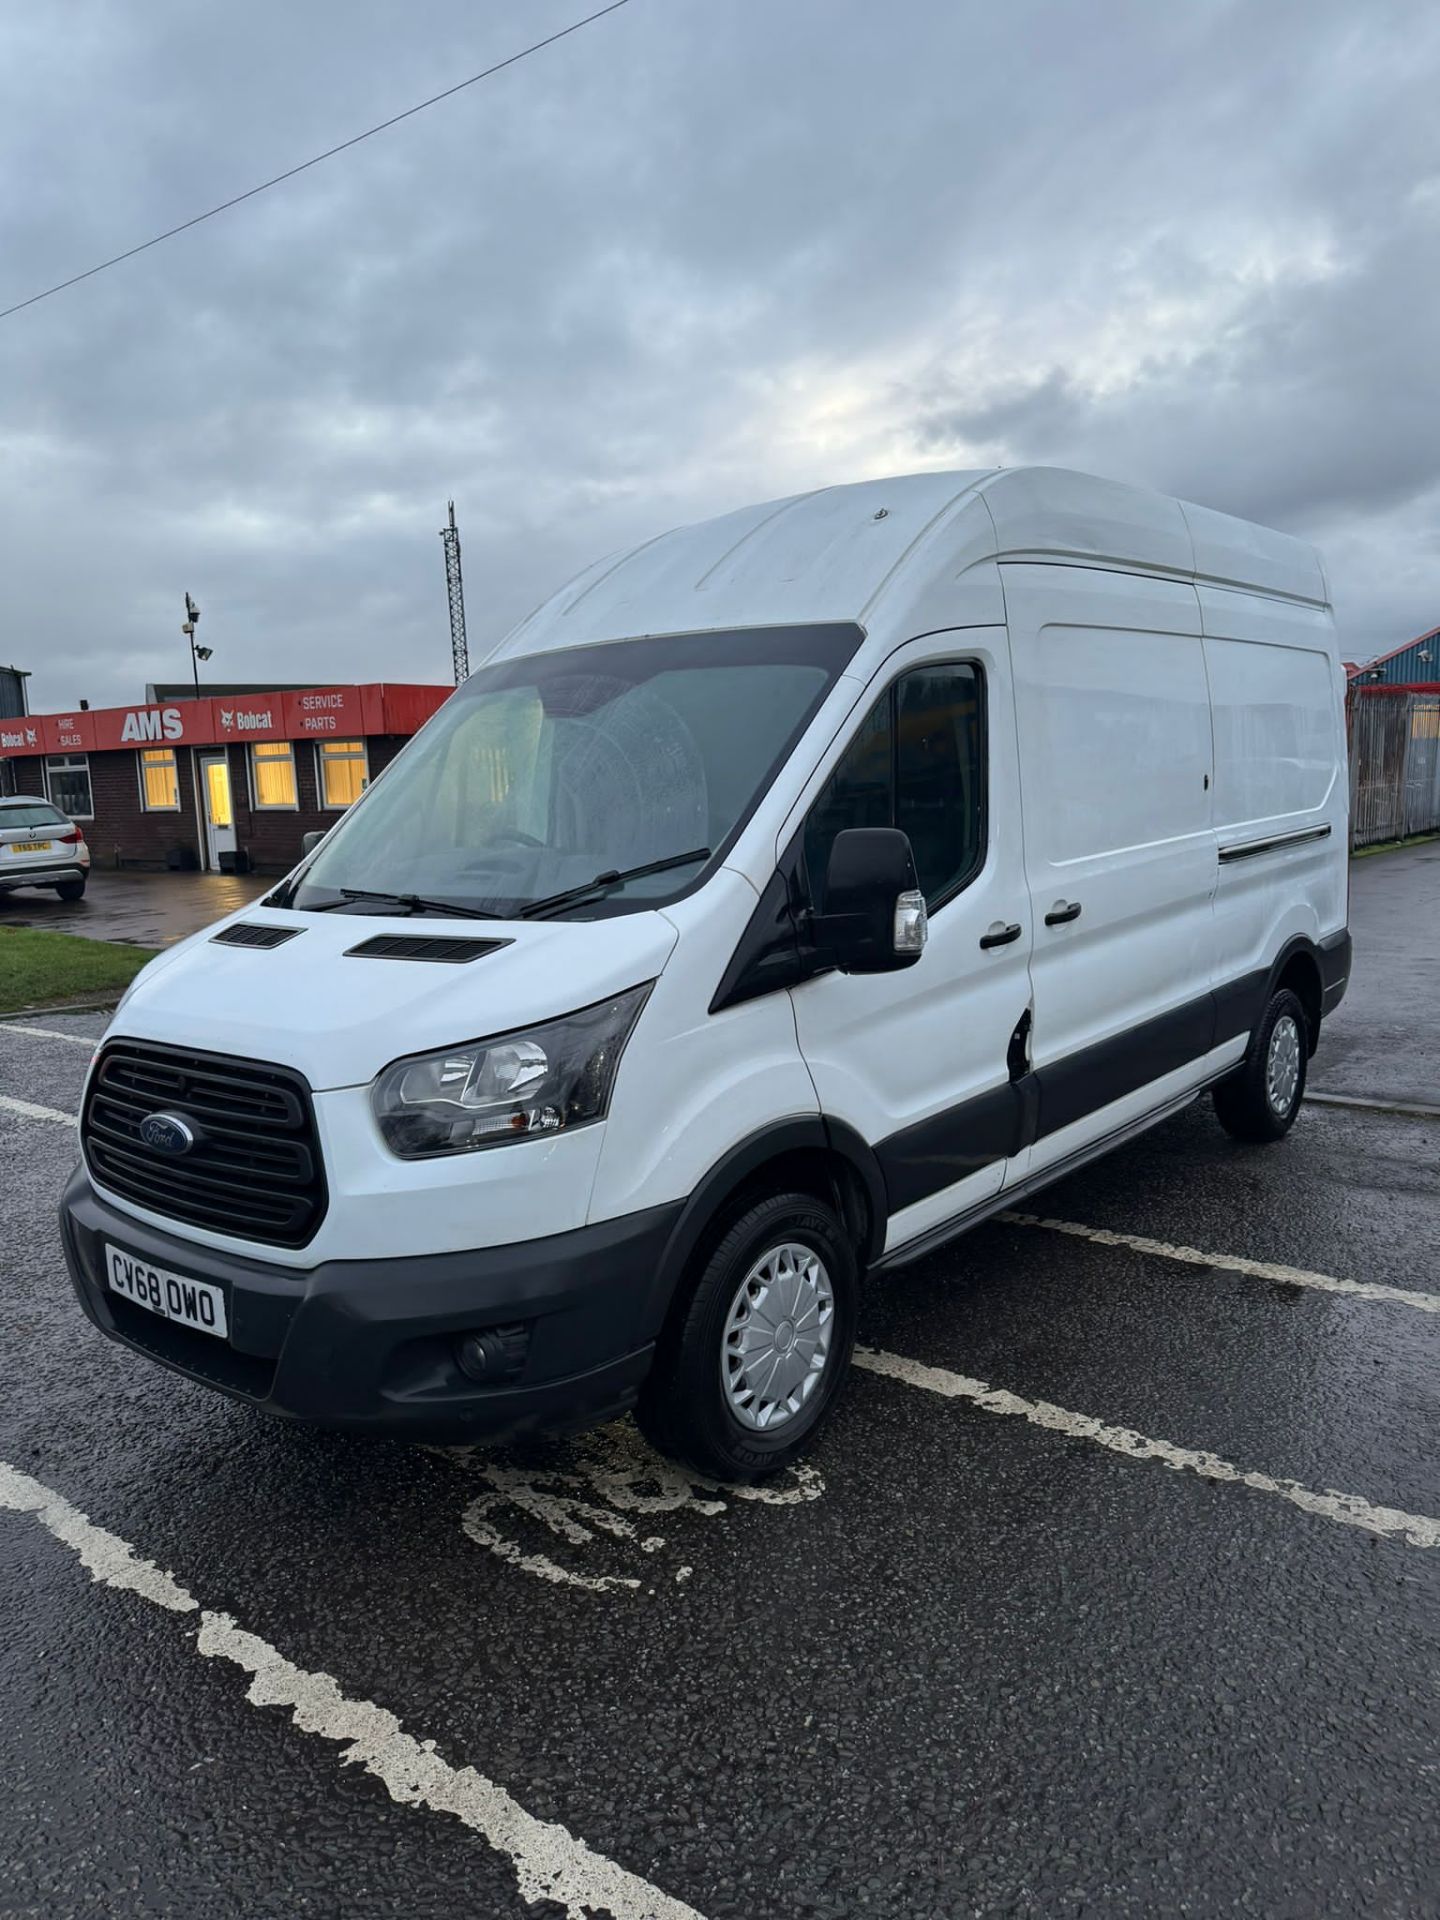 2018 68 FORD TRANSIT 350 PANEL VAN - RWD - EURO 6 - PLY LINED - 98k MILES - Image 2 of 11